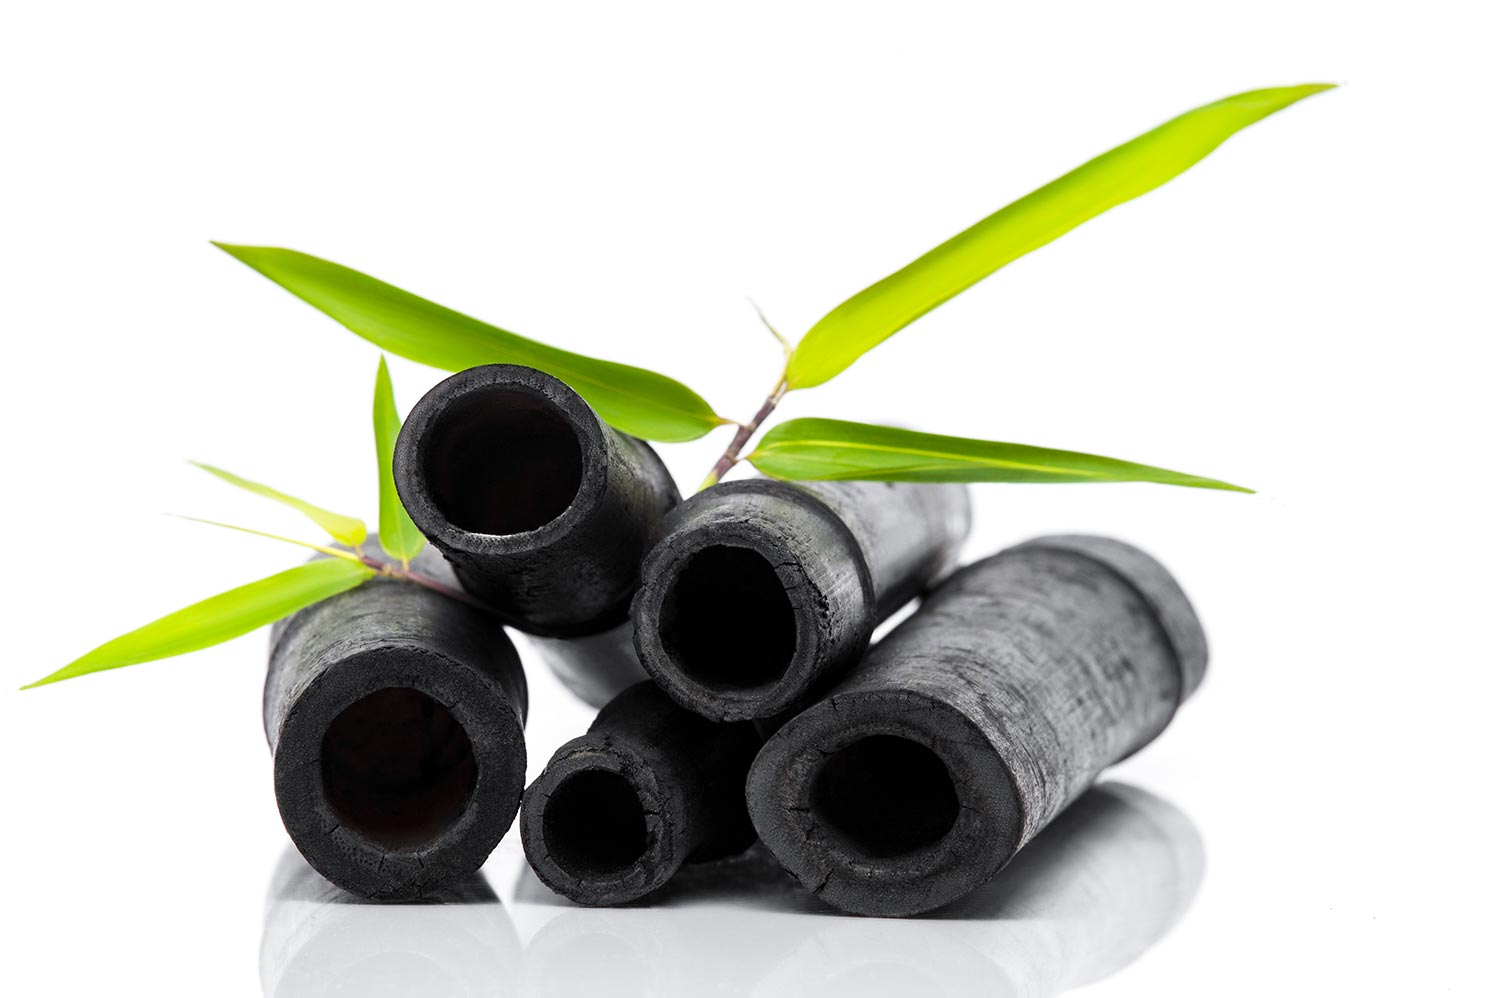 Bamboo charcoal water filter sticks and green leaf